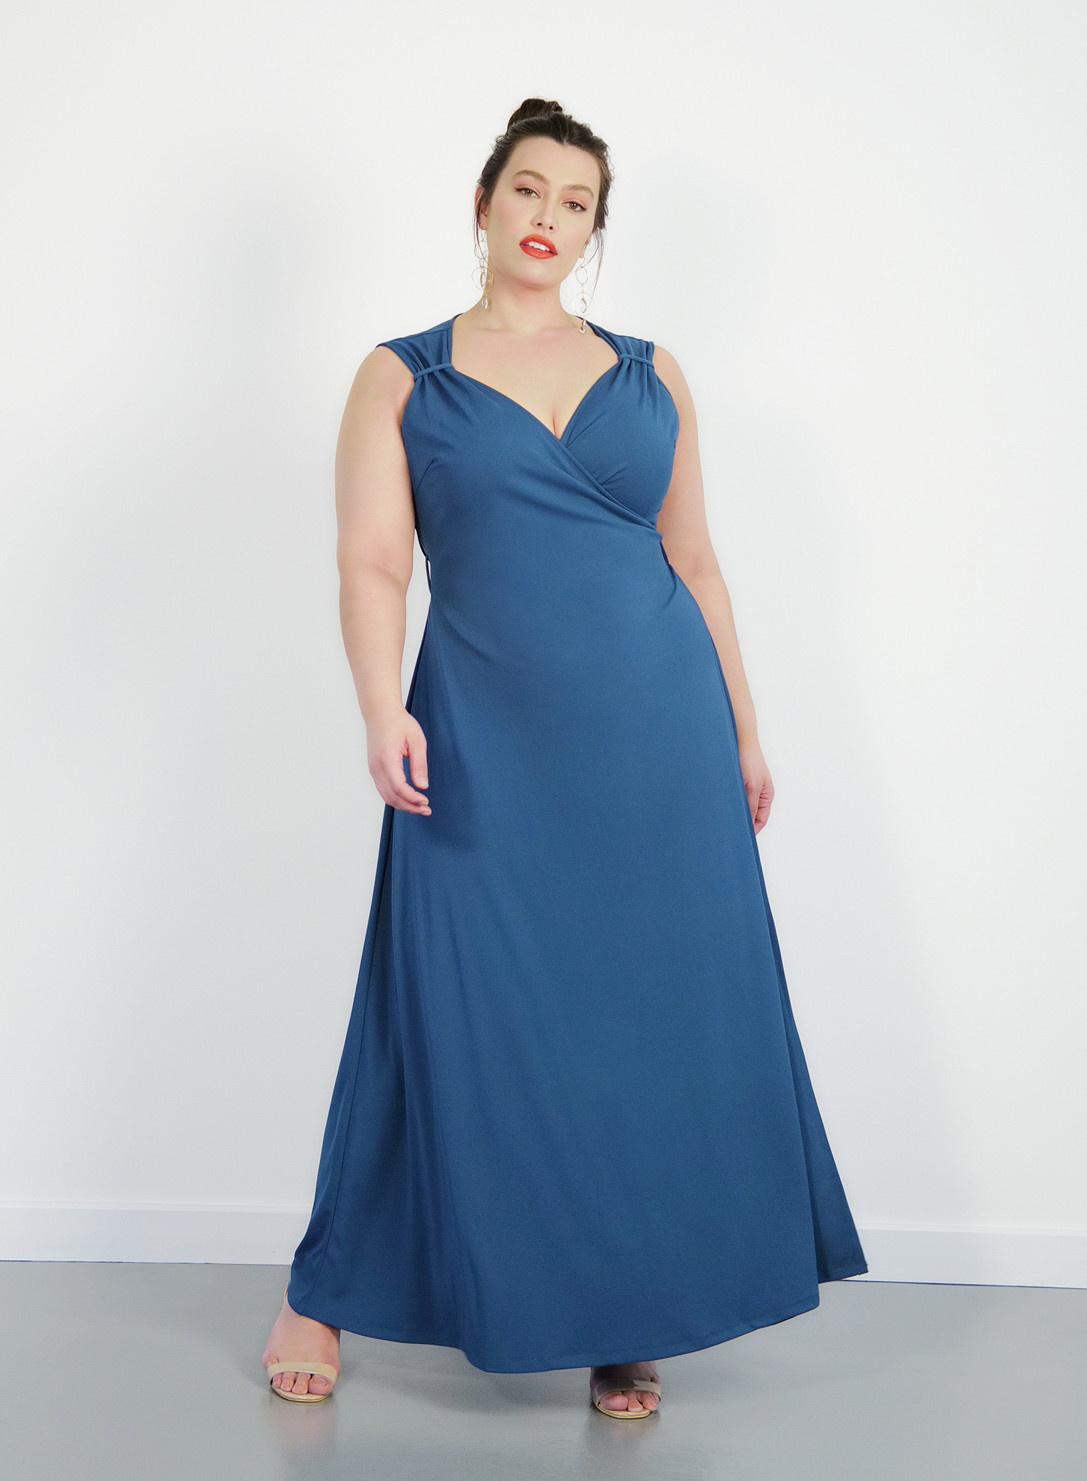 The Best Plus Size Bridesmaid Dresses: 34 Gorgeous Gowns for